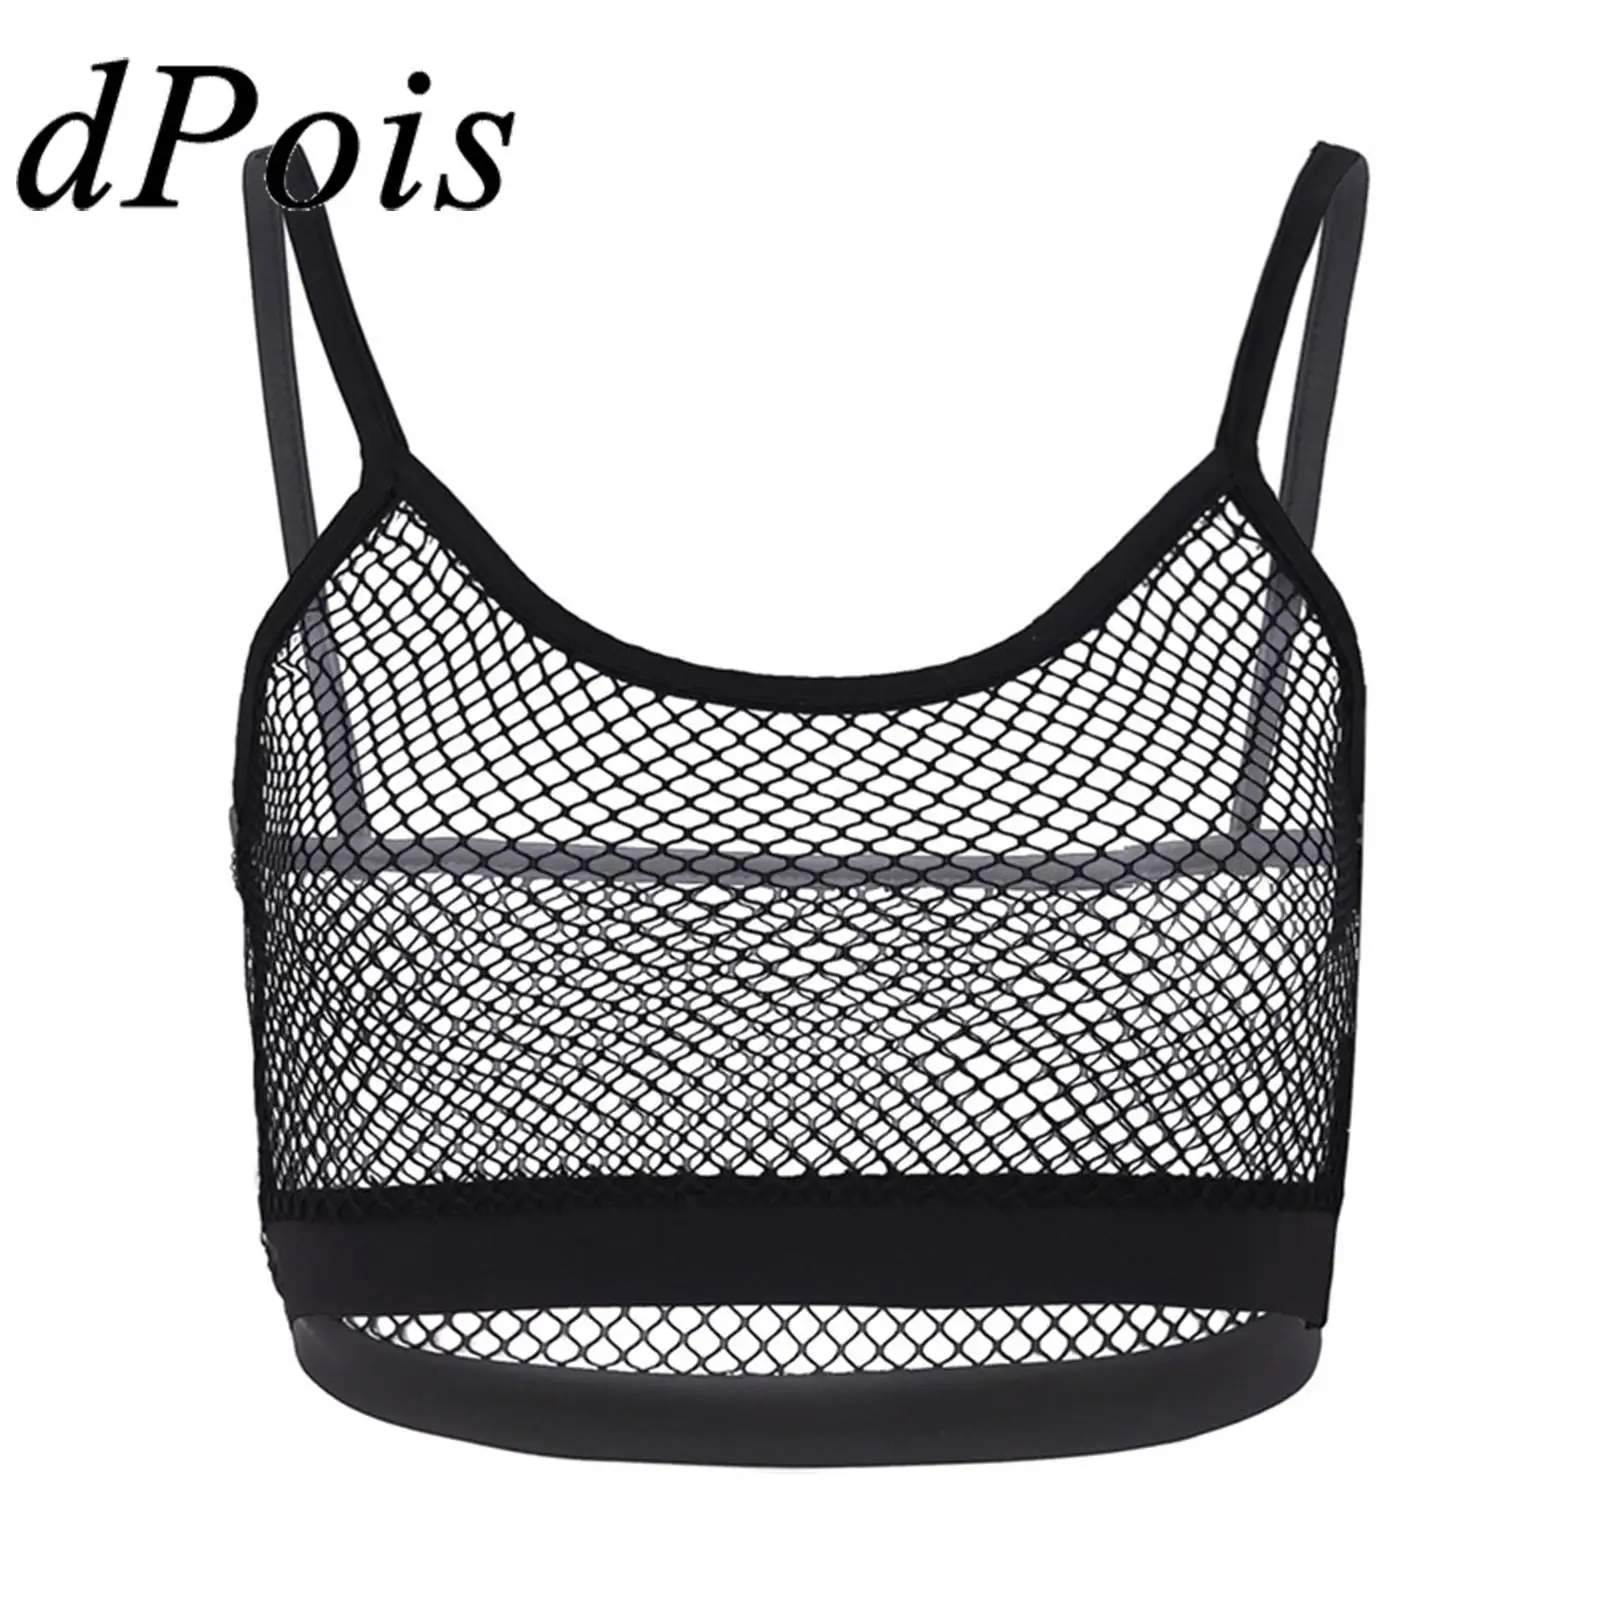 

Womens Hollow Out Crop Top Sexy Femme See-through Lingerie Clubwear Strappy Fishnet Mesh Bralette Sleeveless Vest Crop Tank Top